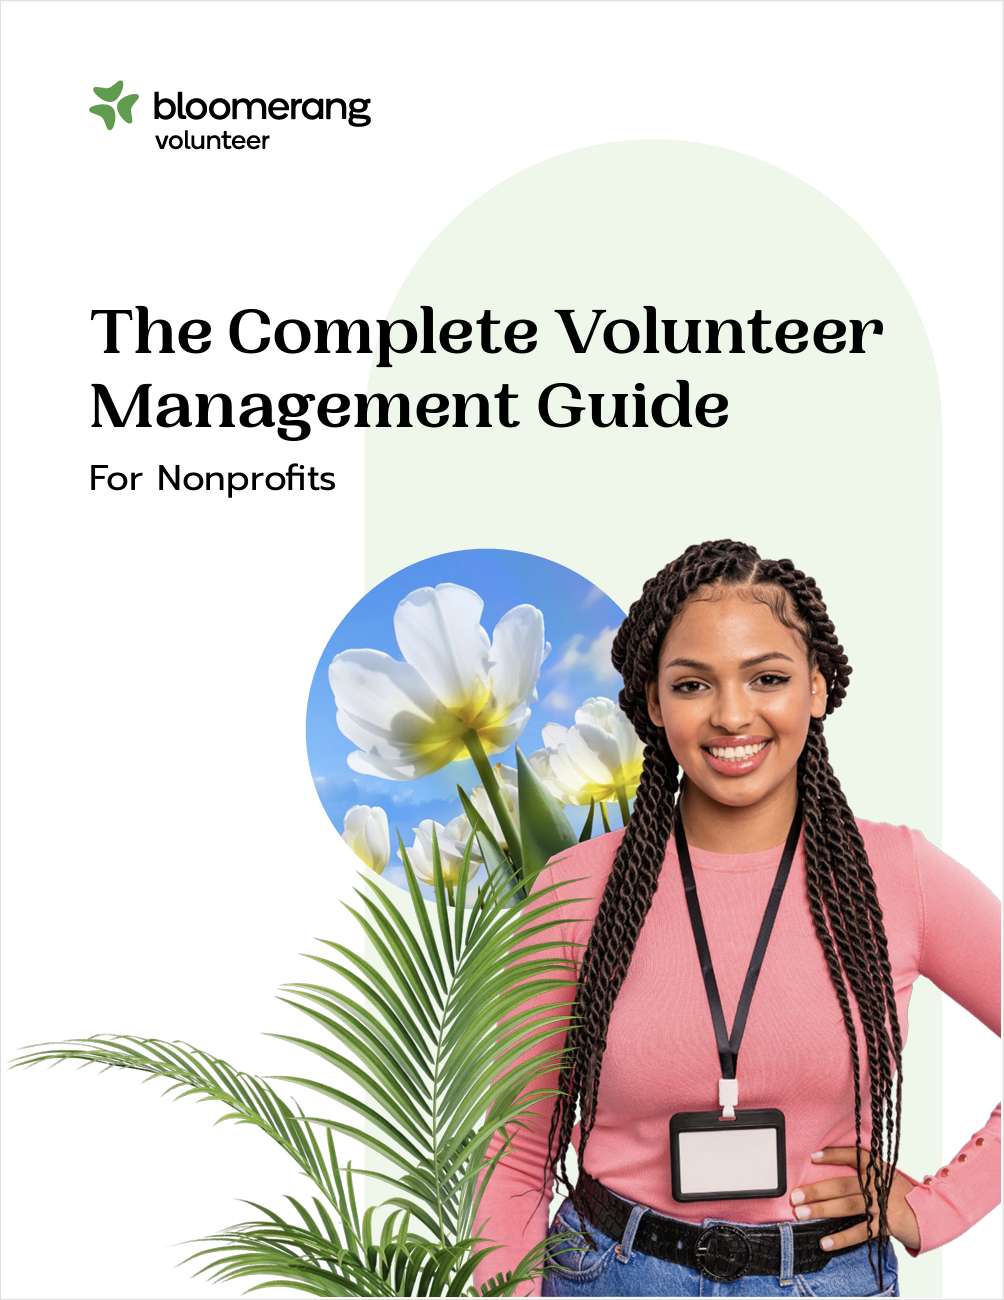 The Complete Volunteer Management Guide For Nonprofits